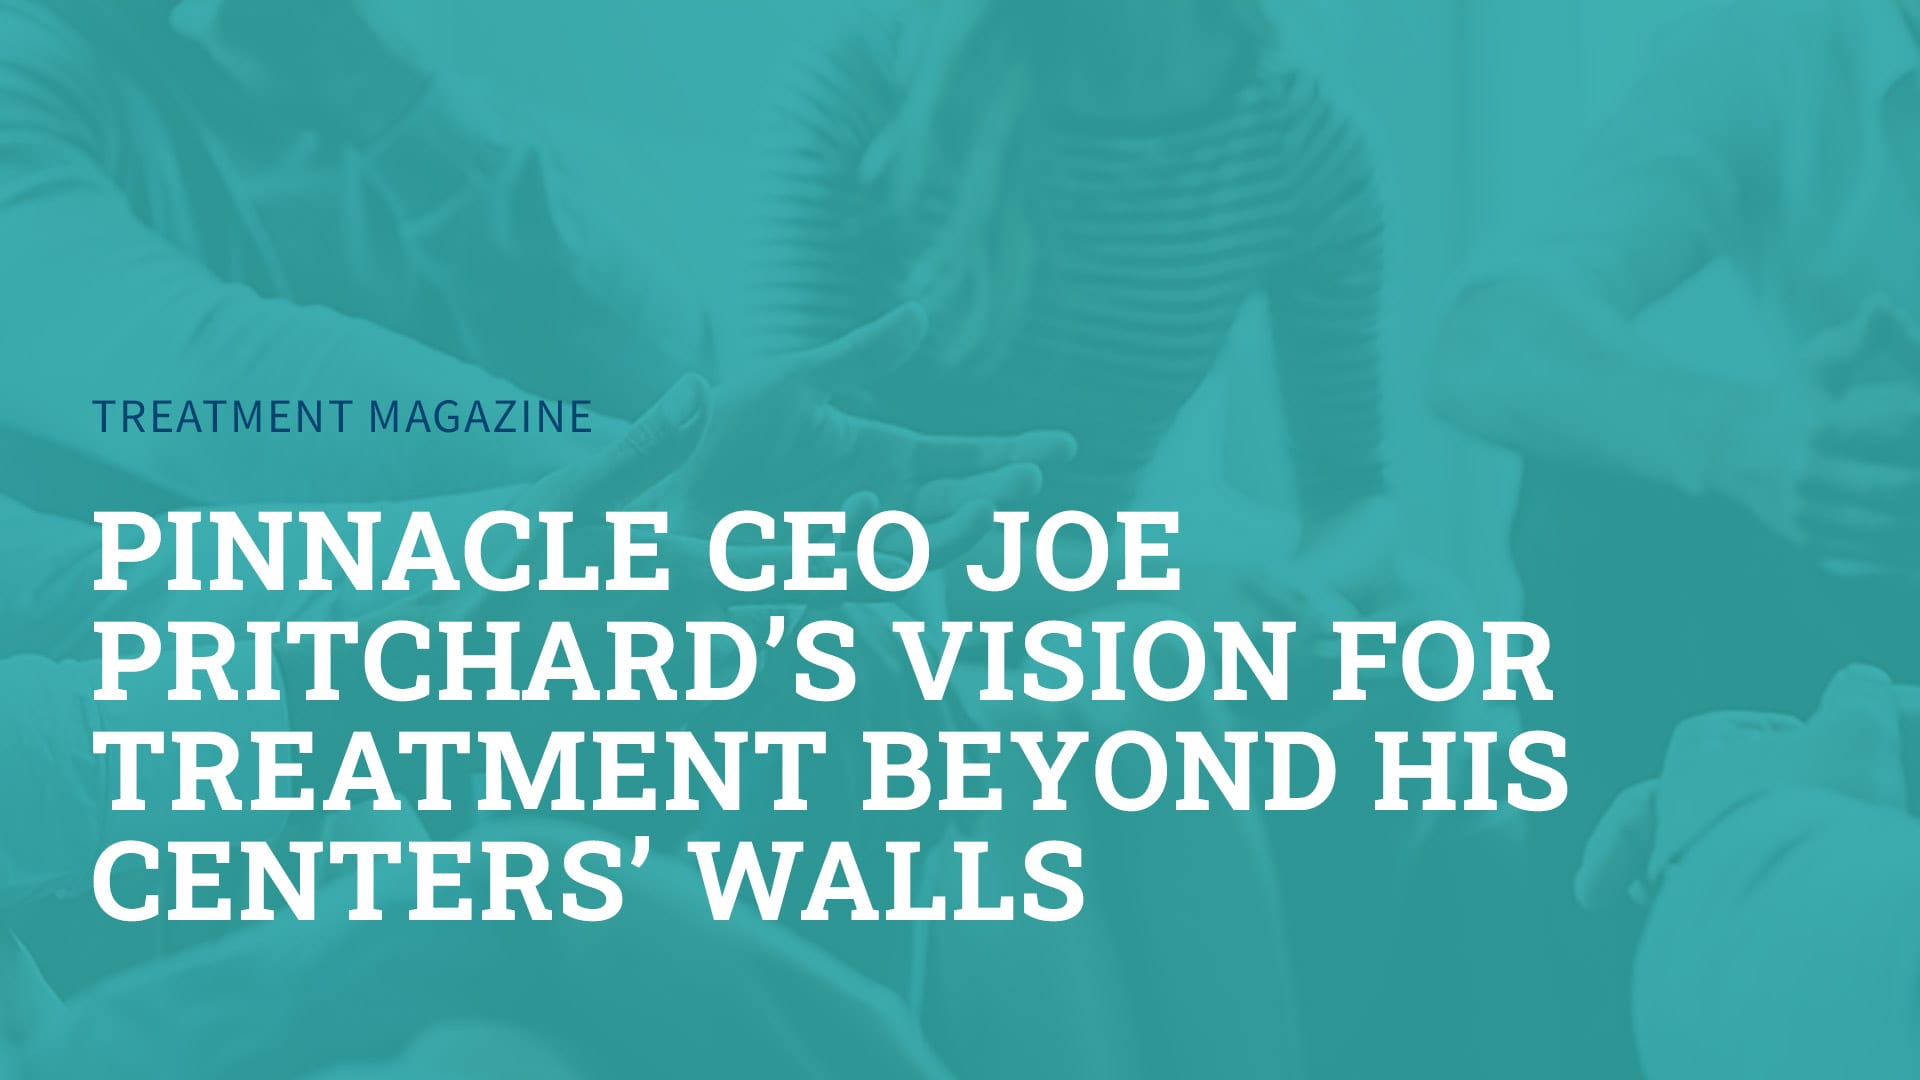 Pinnacle CEO Joe Pritchard’s Vision for Treatment Beyond His Centers’ Walls